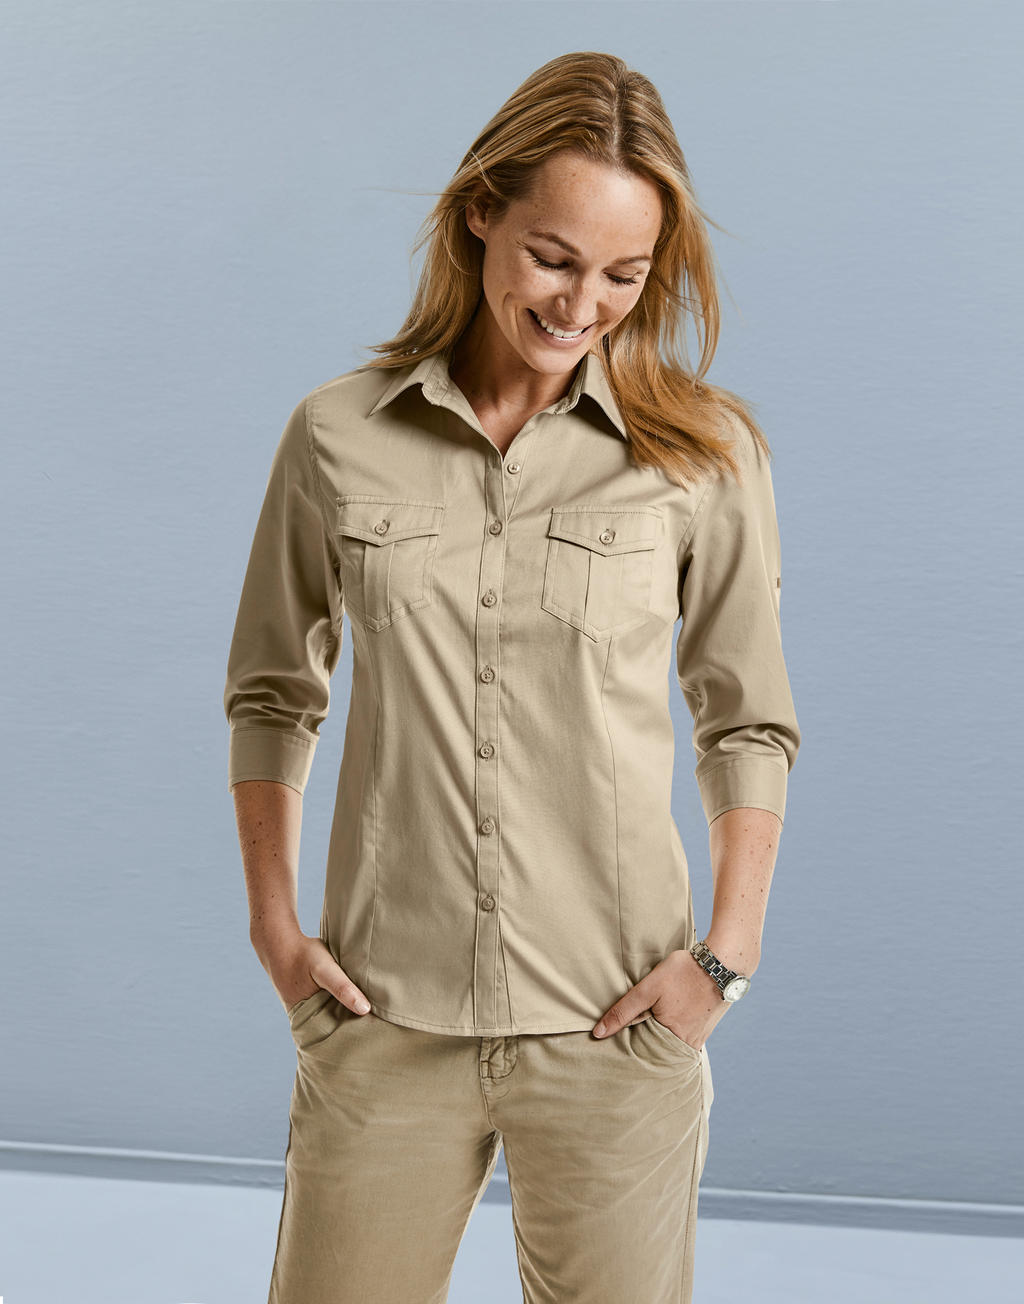  Ladies Roll 3/4 Sleeve Shirt in Farbe White